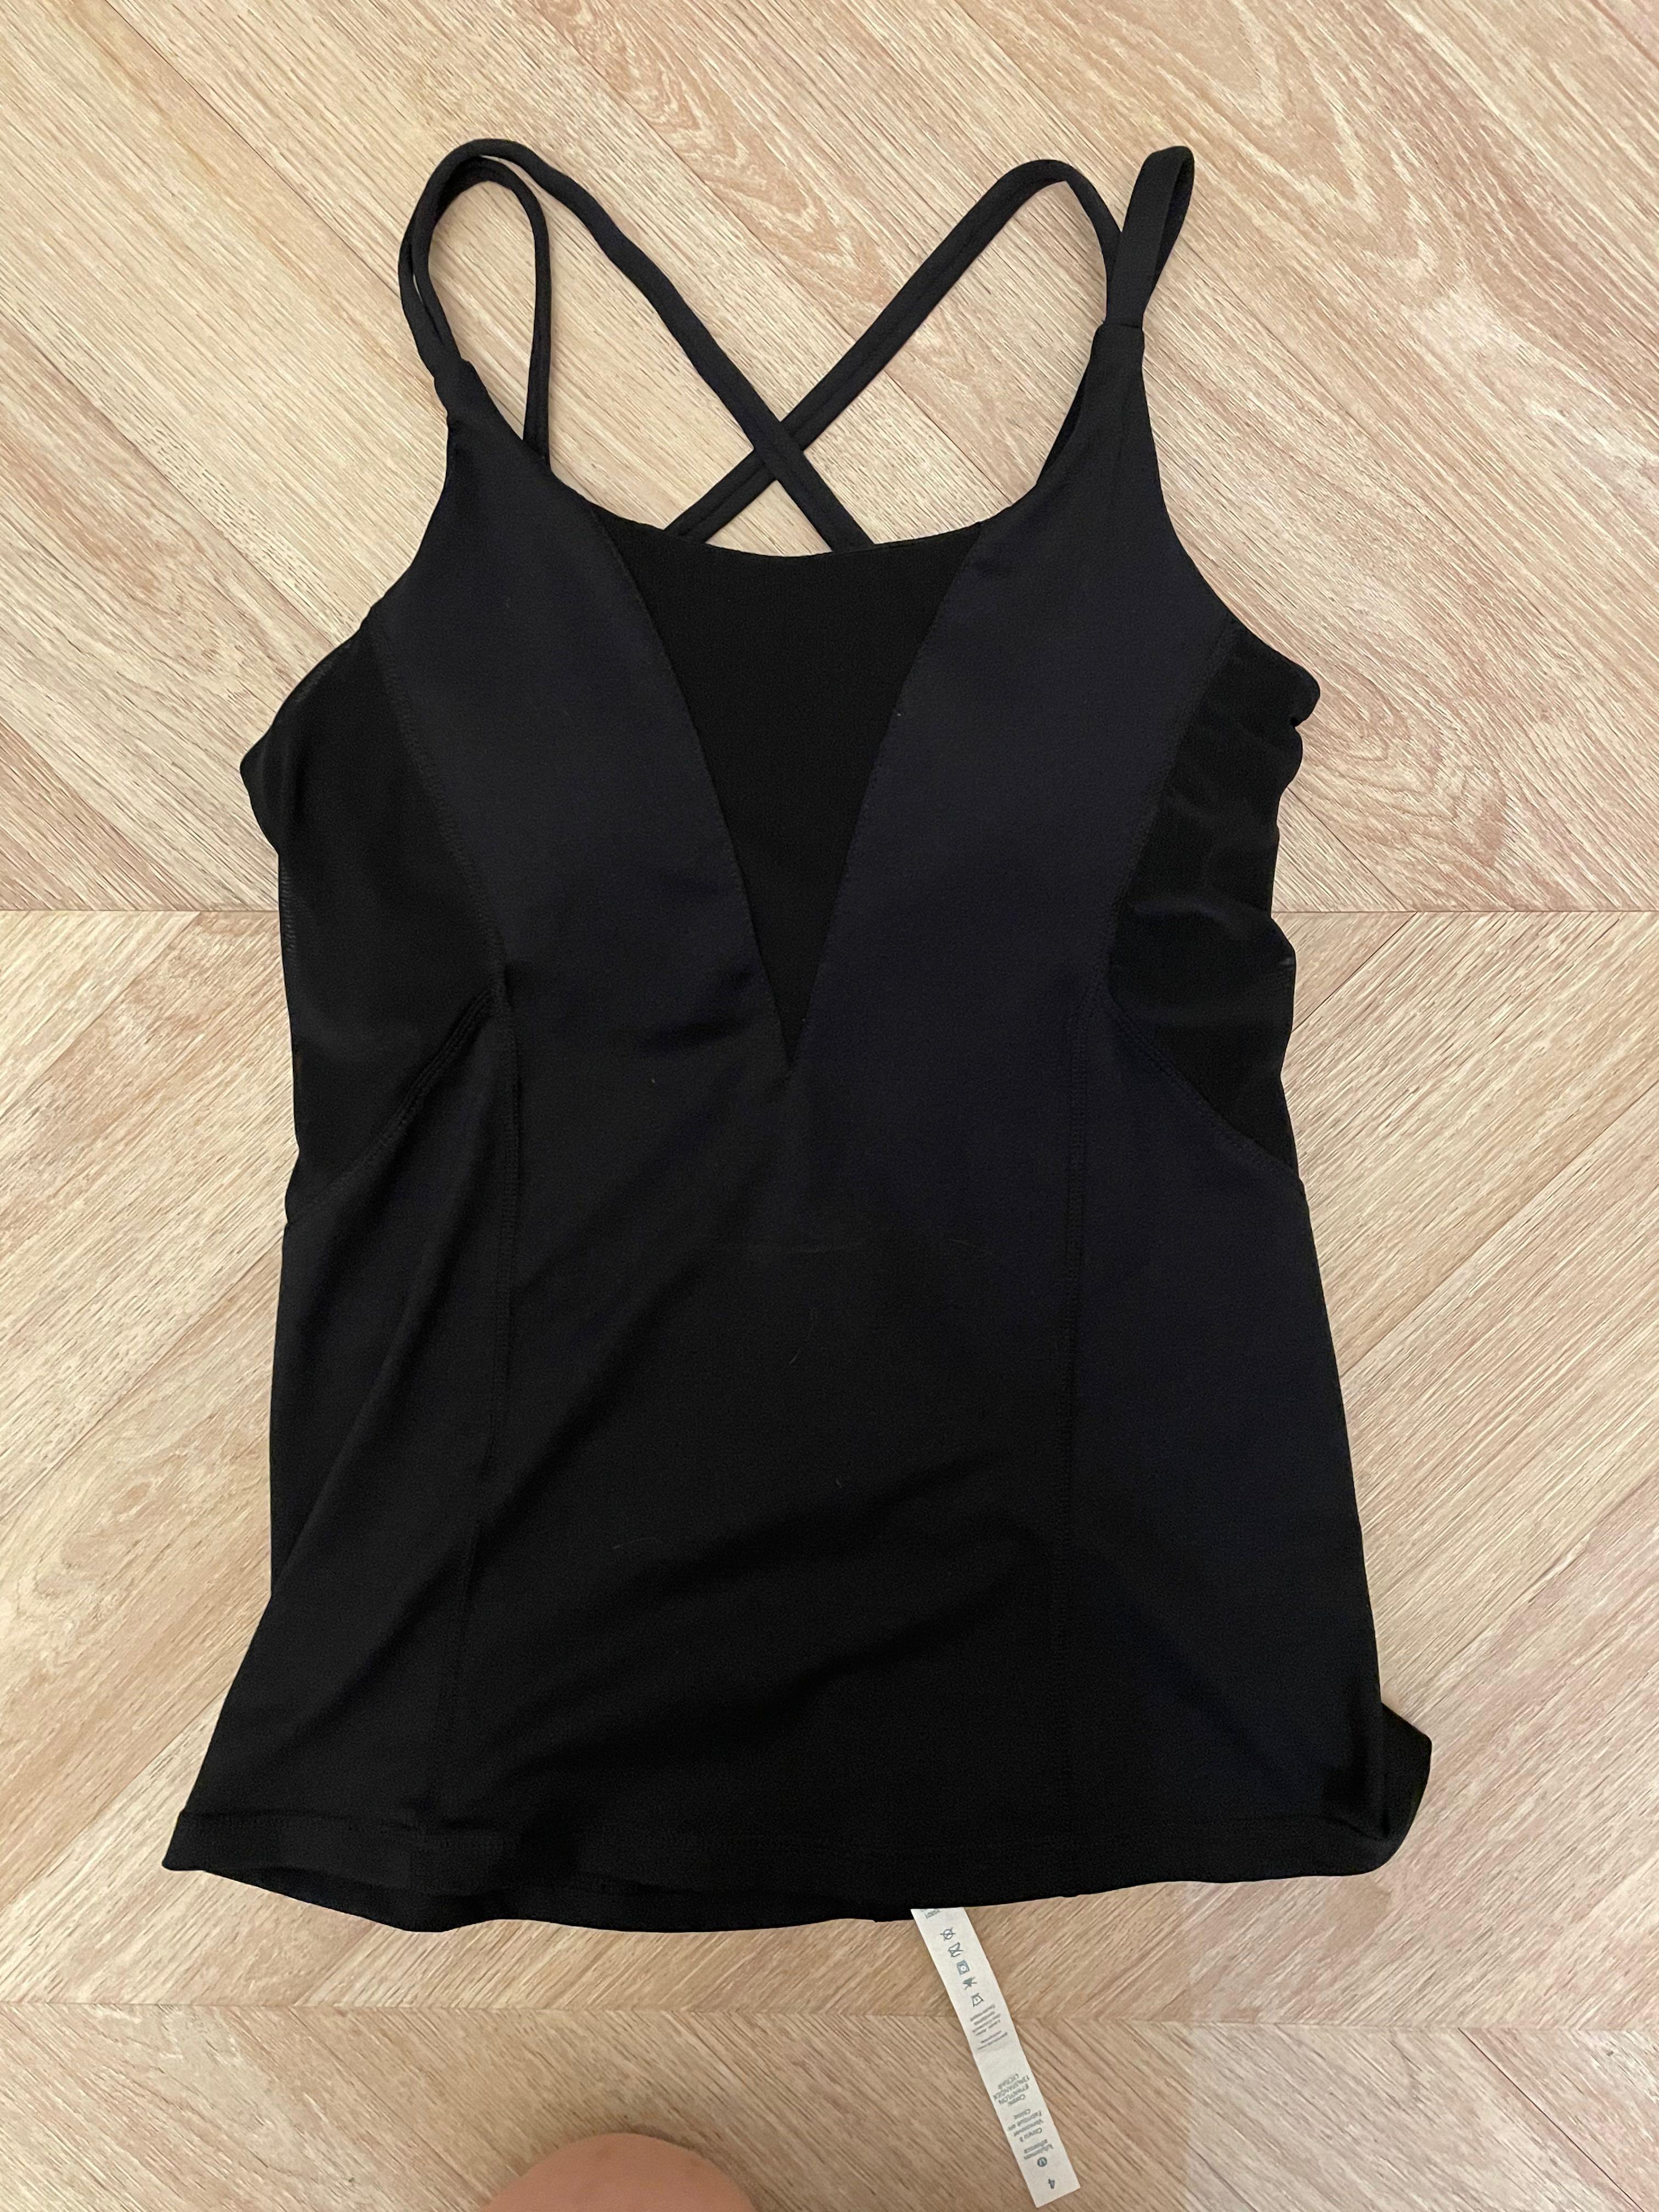 BRAND NEW Lululemon Tank Top with In-built bra (Size 4)